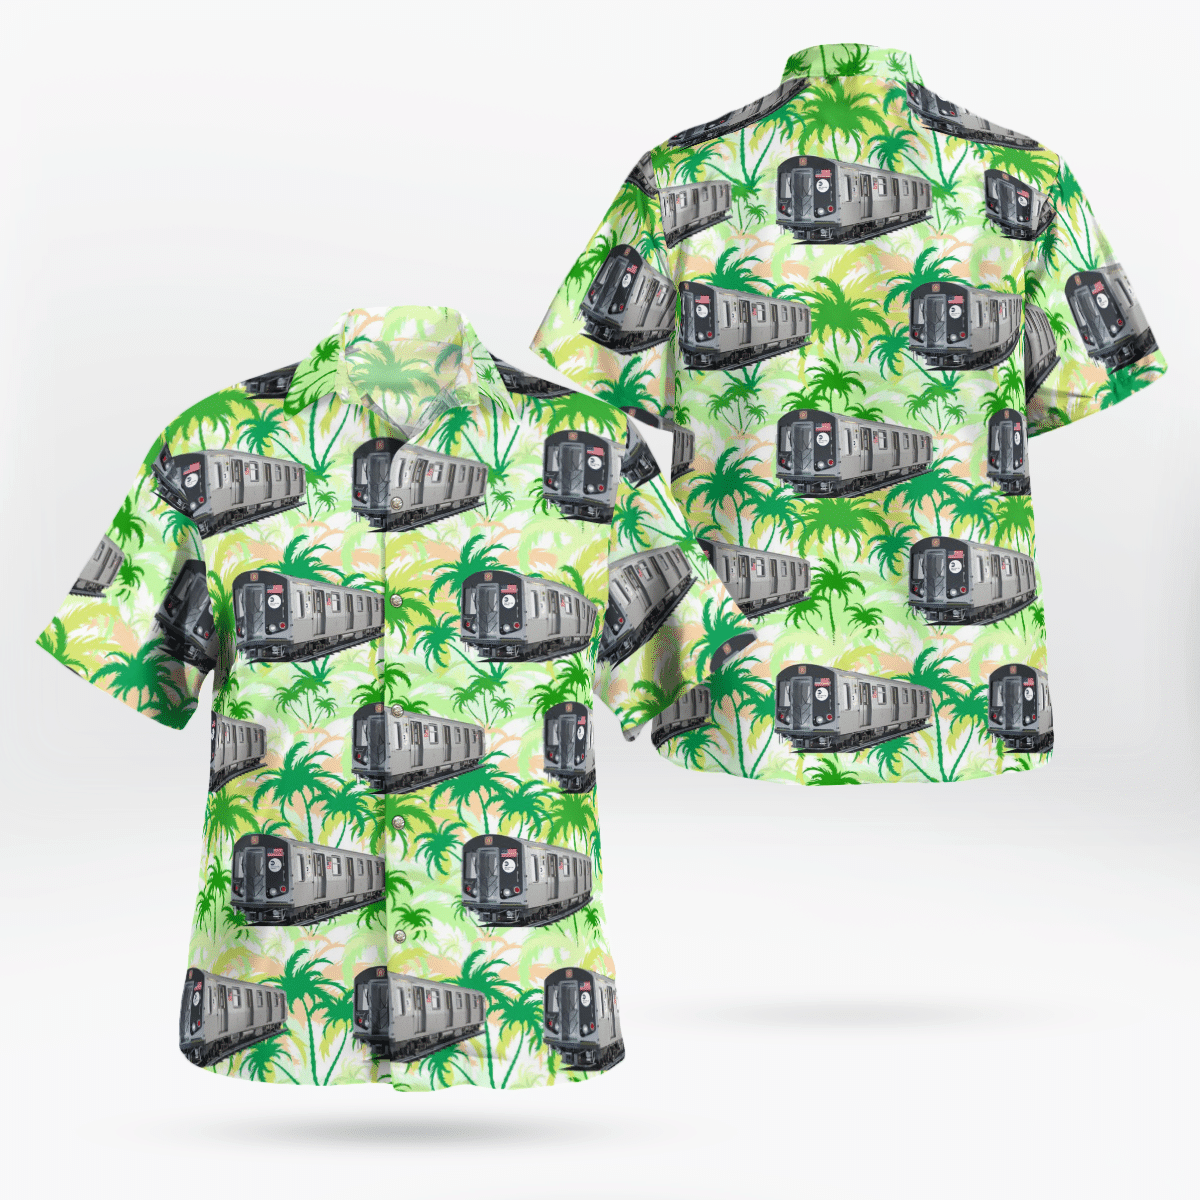 Shop now to find the perfect Hawaii Shirt for your hobby 31